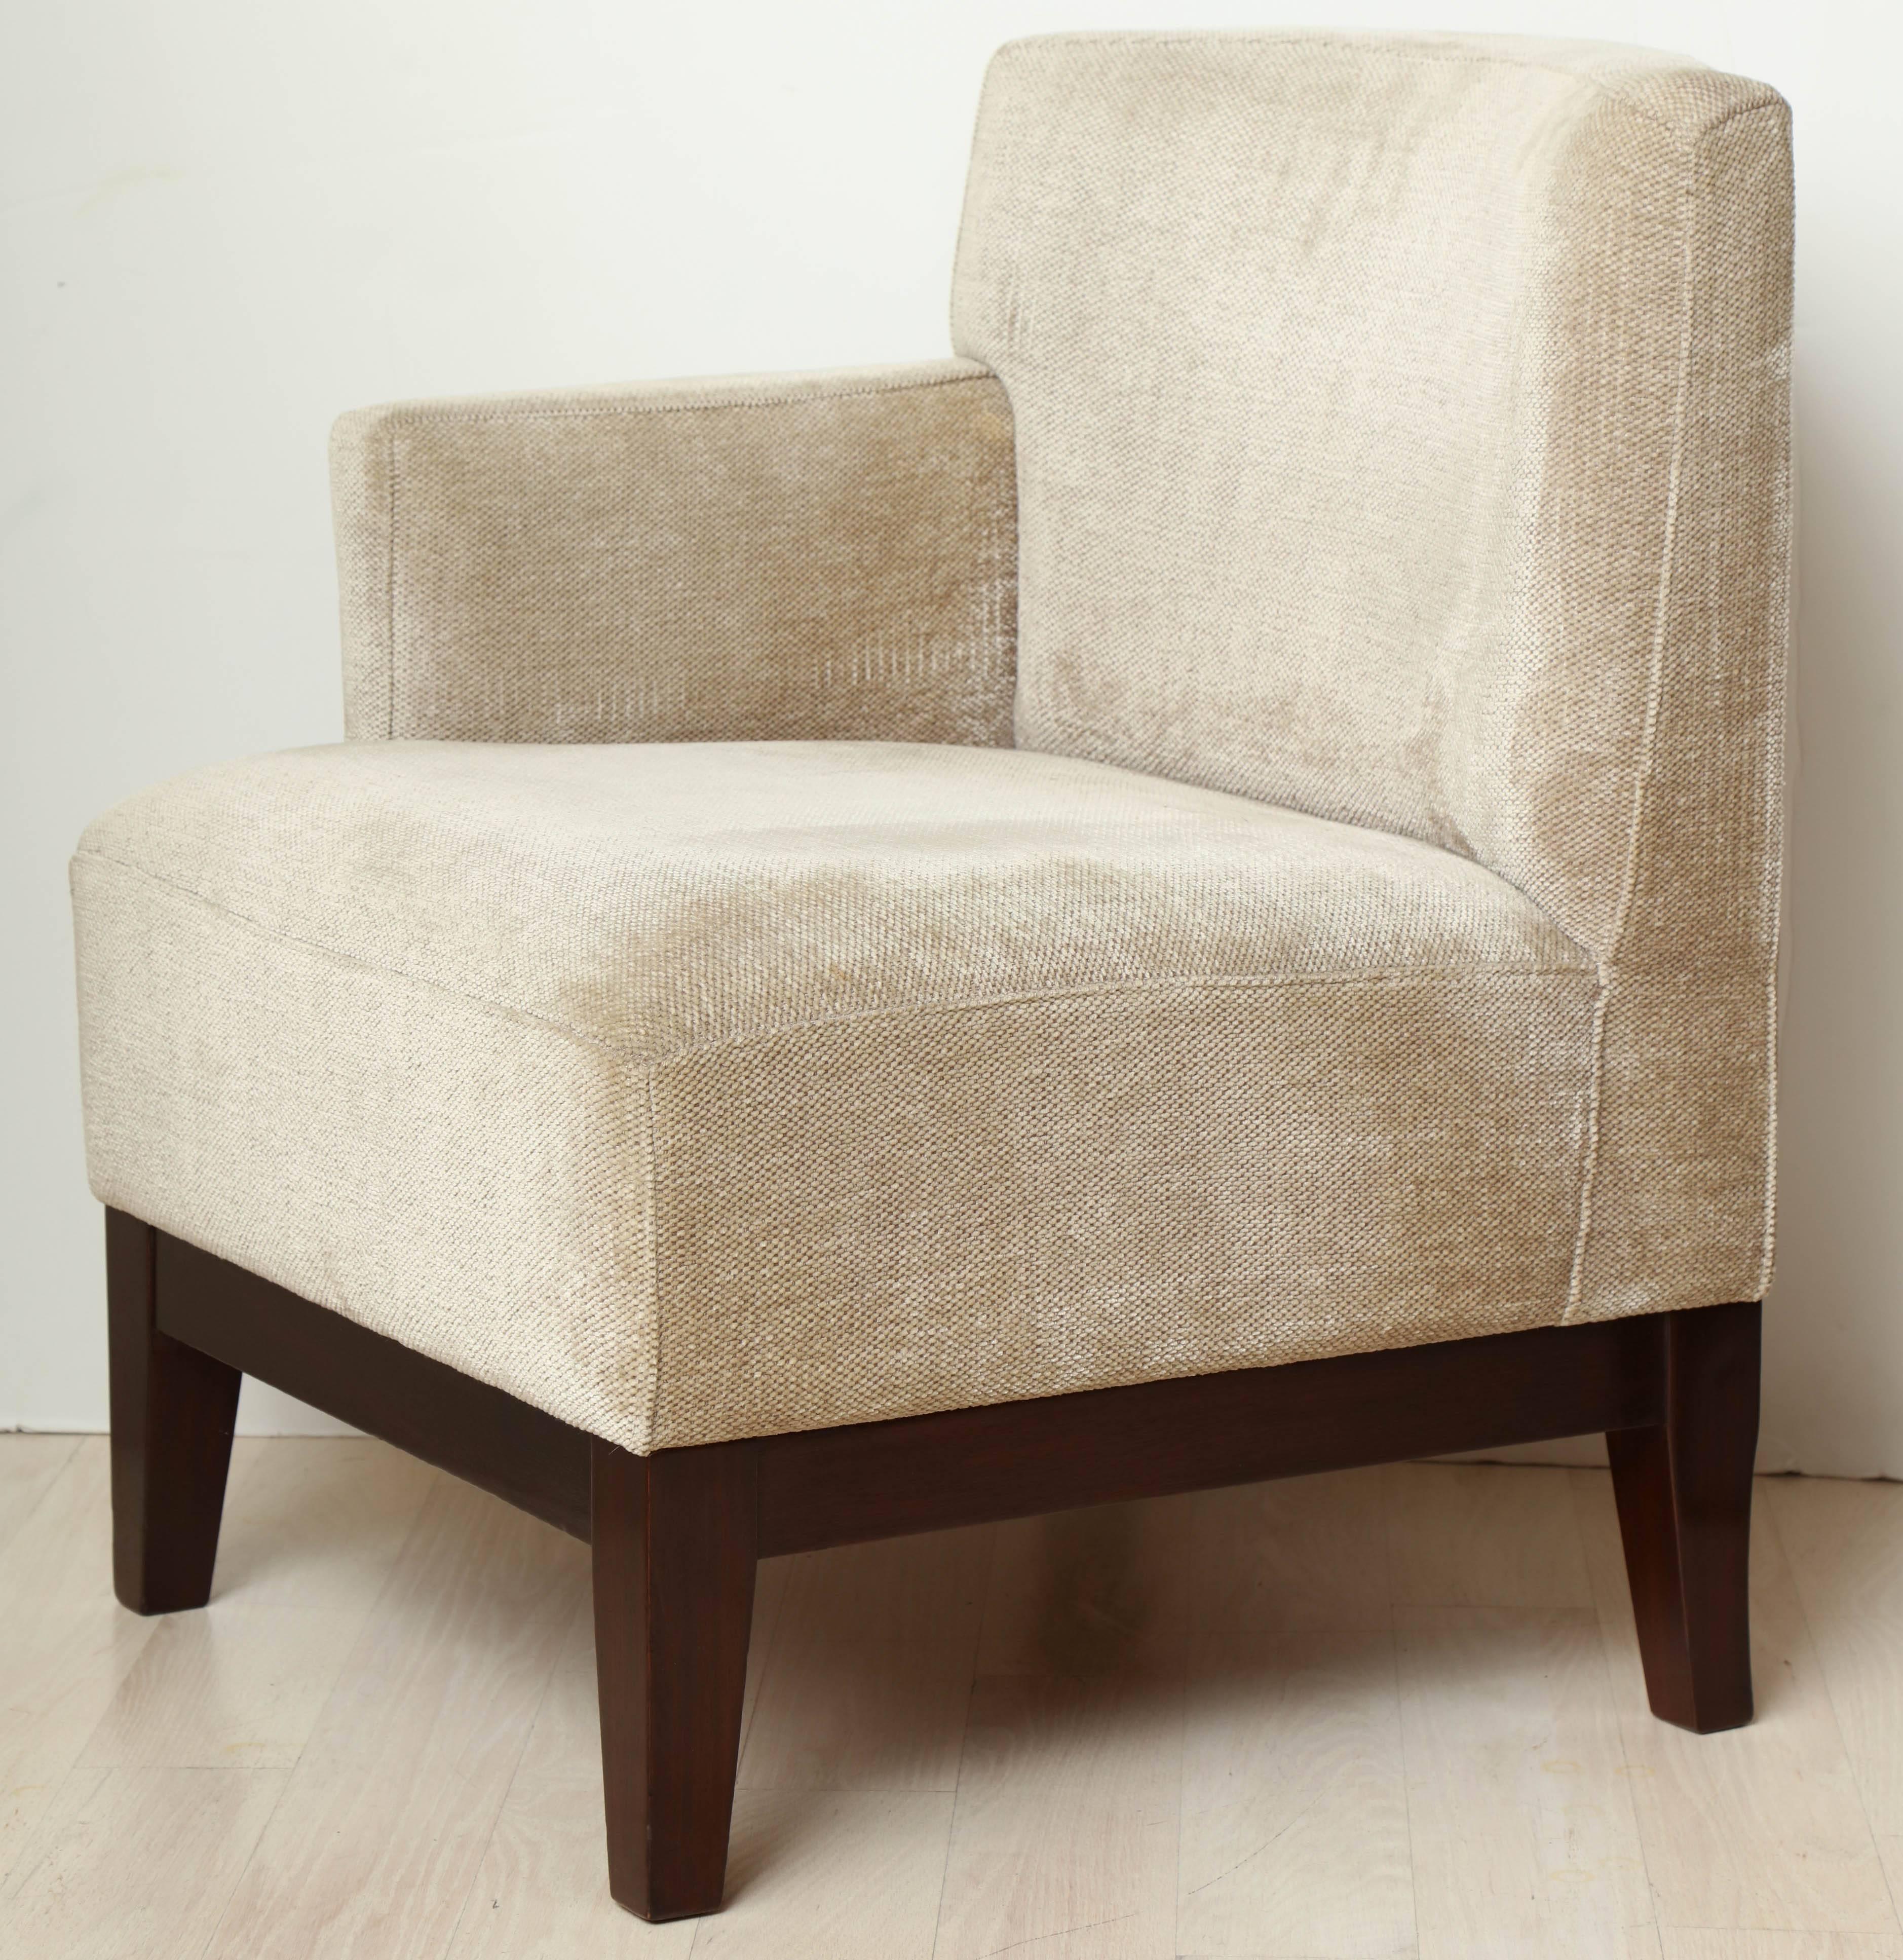 Pair of Modern Single Arm Wood and Upholstered Beige Chenille Chairs, Belgium For Sale 5